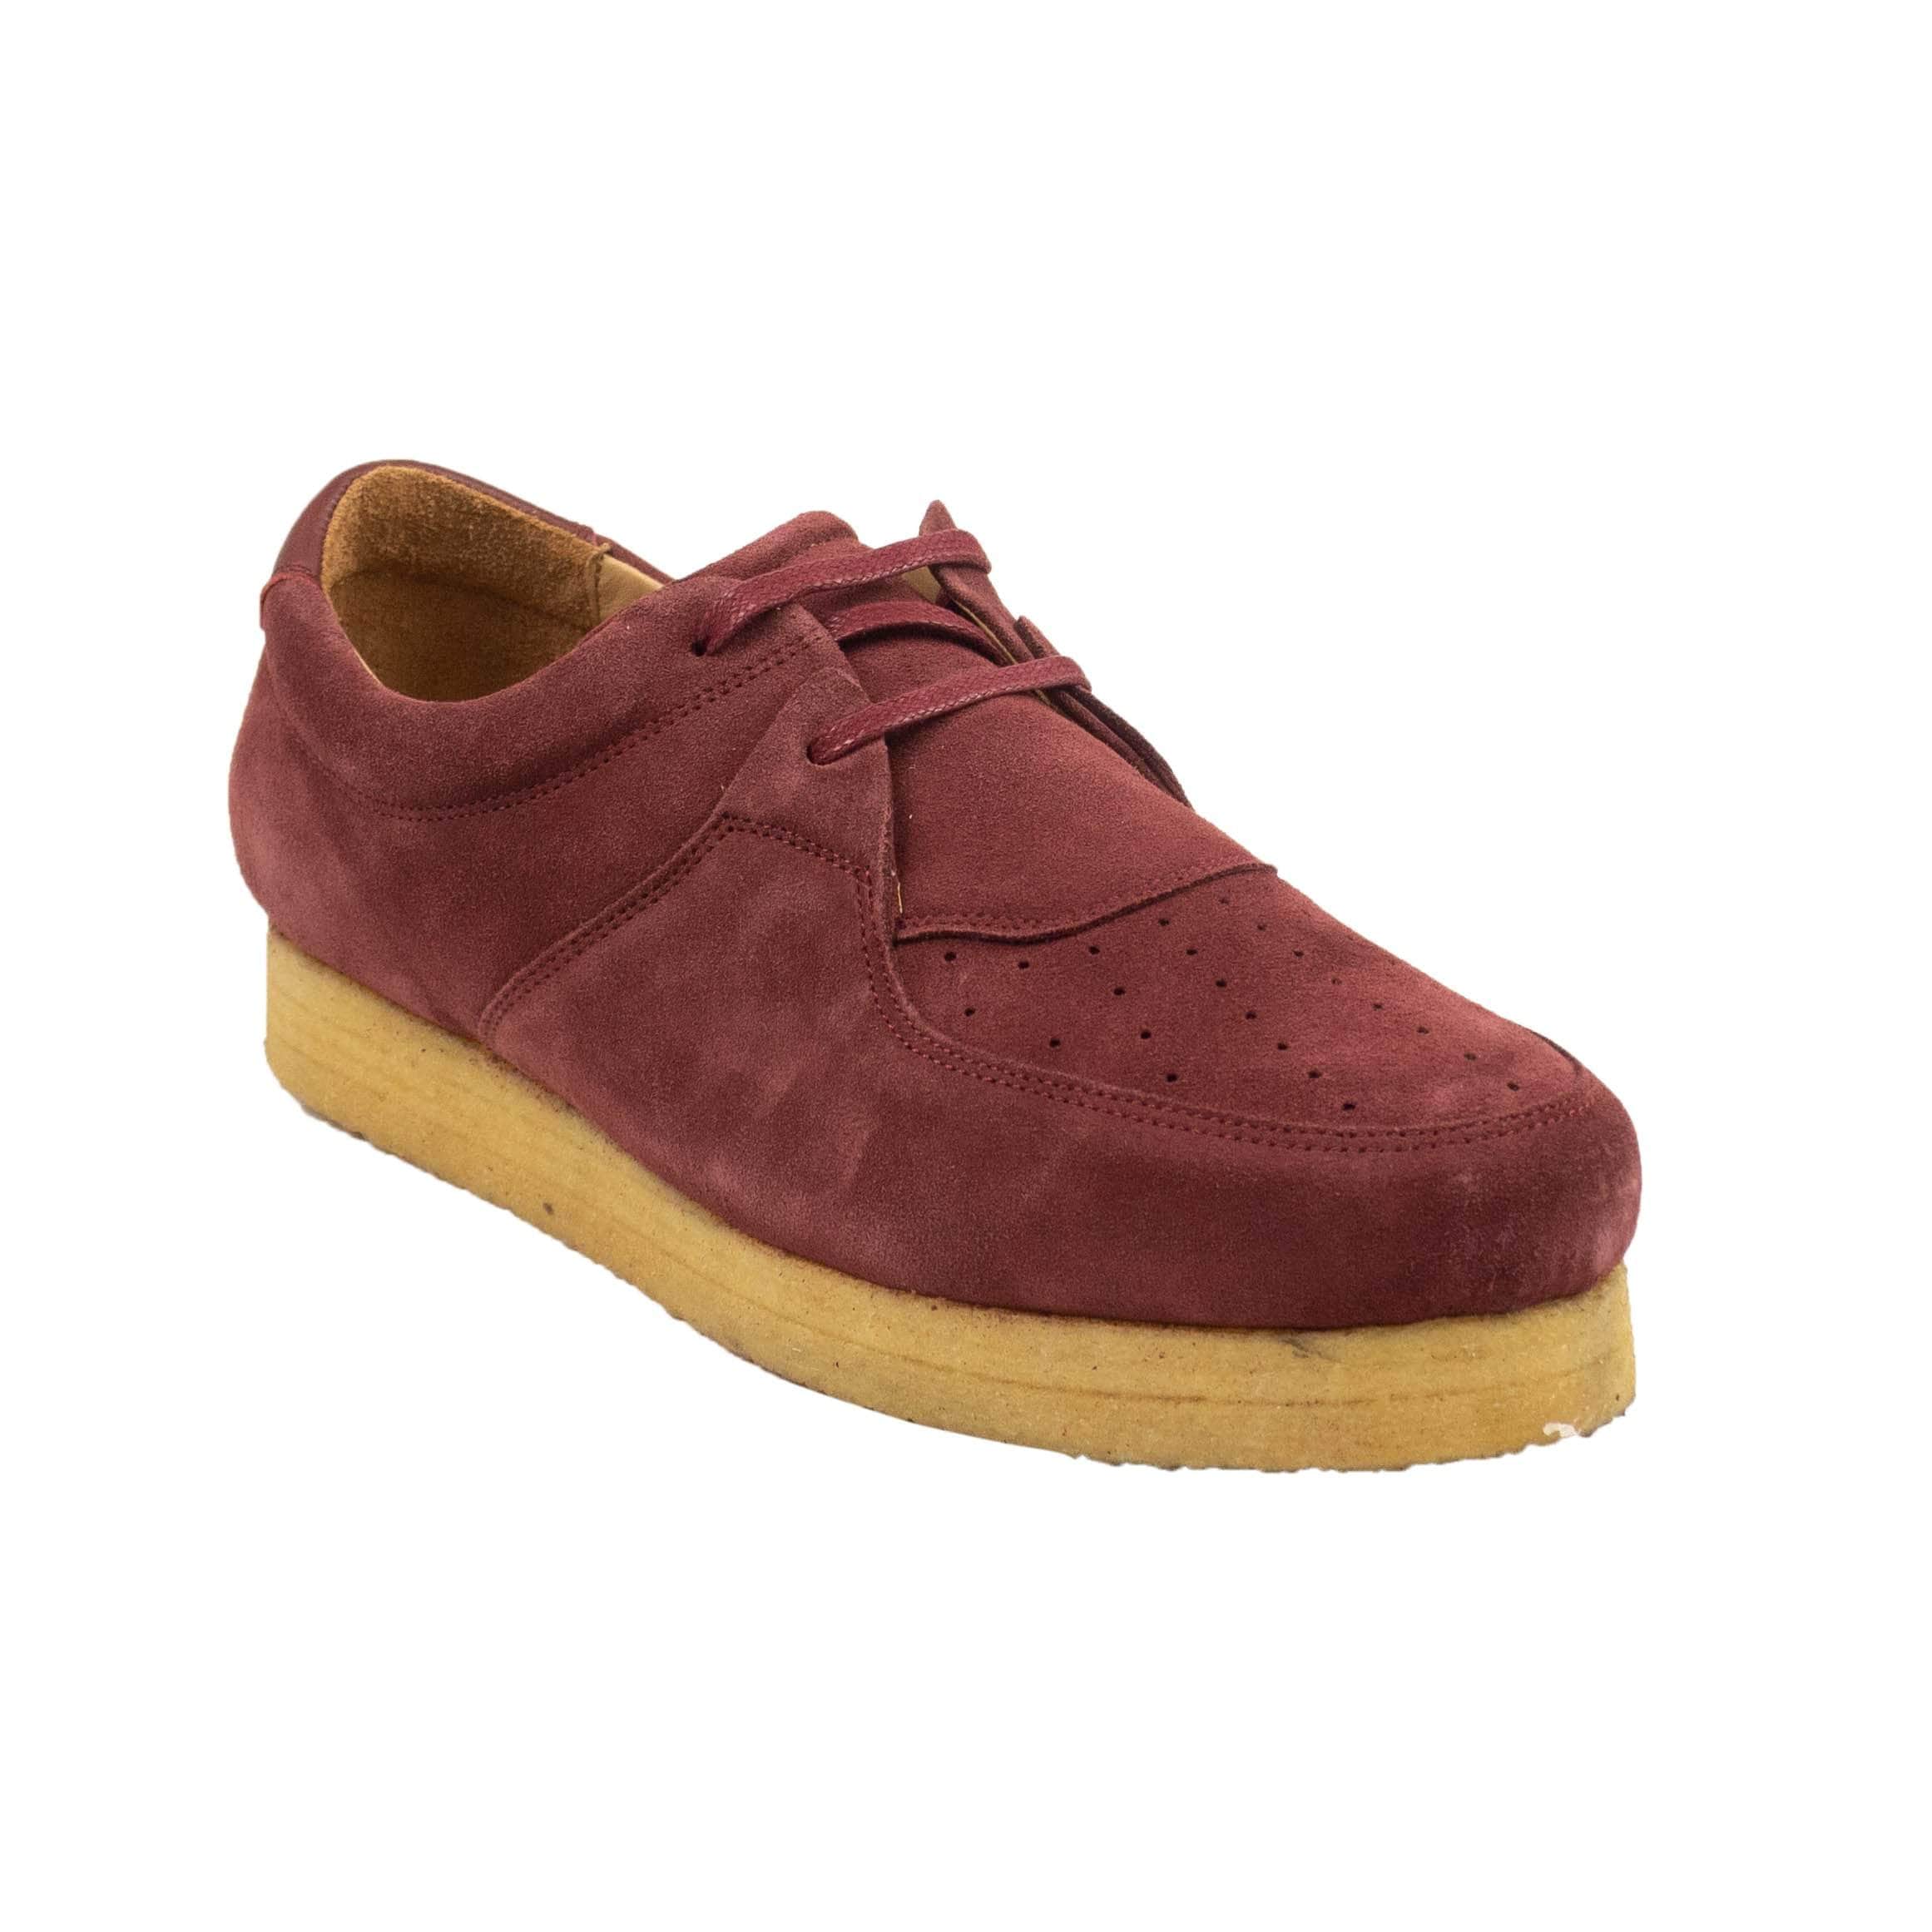 AIME LEON DORE aime-leon-dore, channelenable-all, chicmi, couponcollection, gender-mens, mens-oxfords-derby-shoes, mens-shoes, MixedApparel, size-9, under-250 9 Burgundy Q27 Wallabe Shoes 95-ALD-2002/9 95-ALD-2002/9